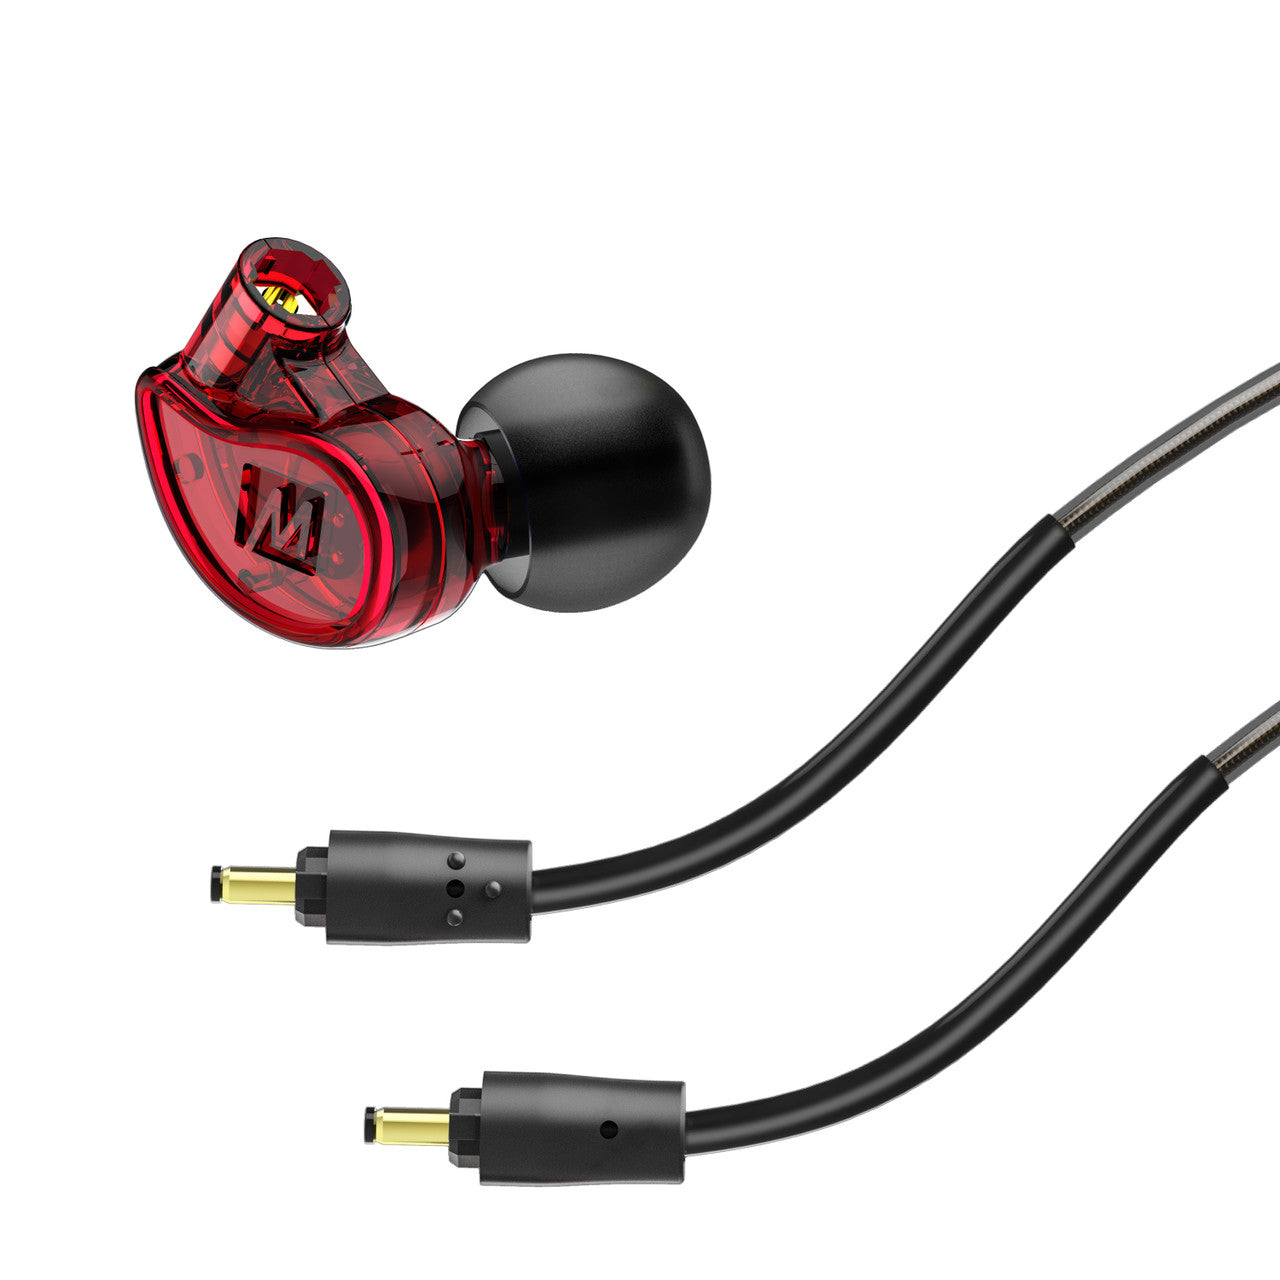 Image of M6 PRO Noise-Isolating Musician’s In-Ear Monitors.